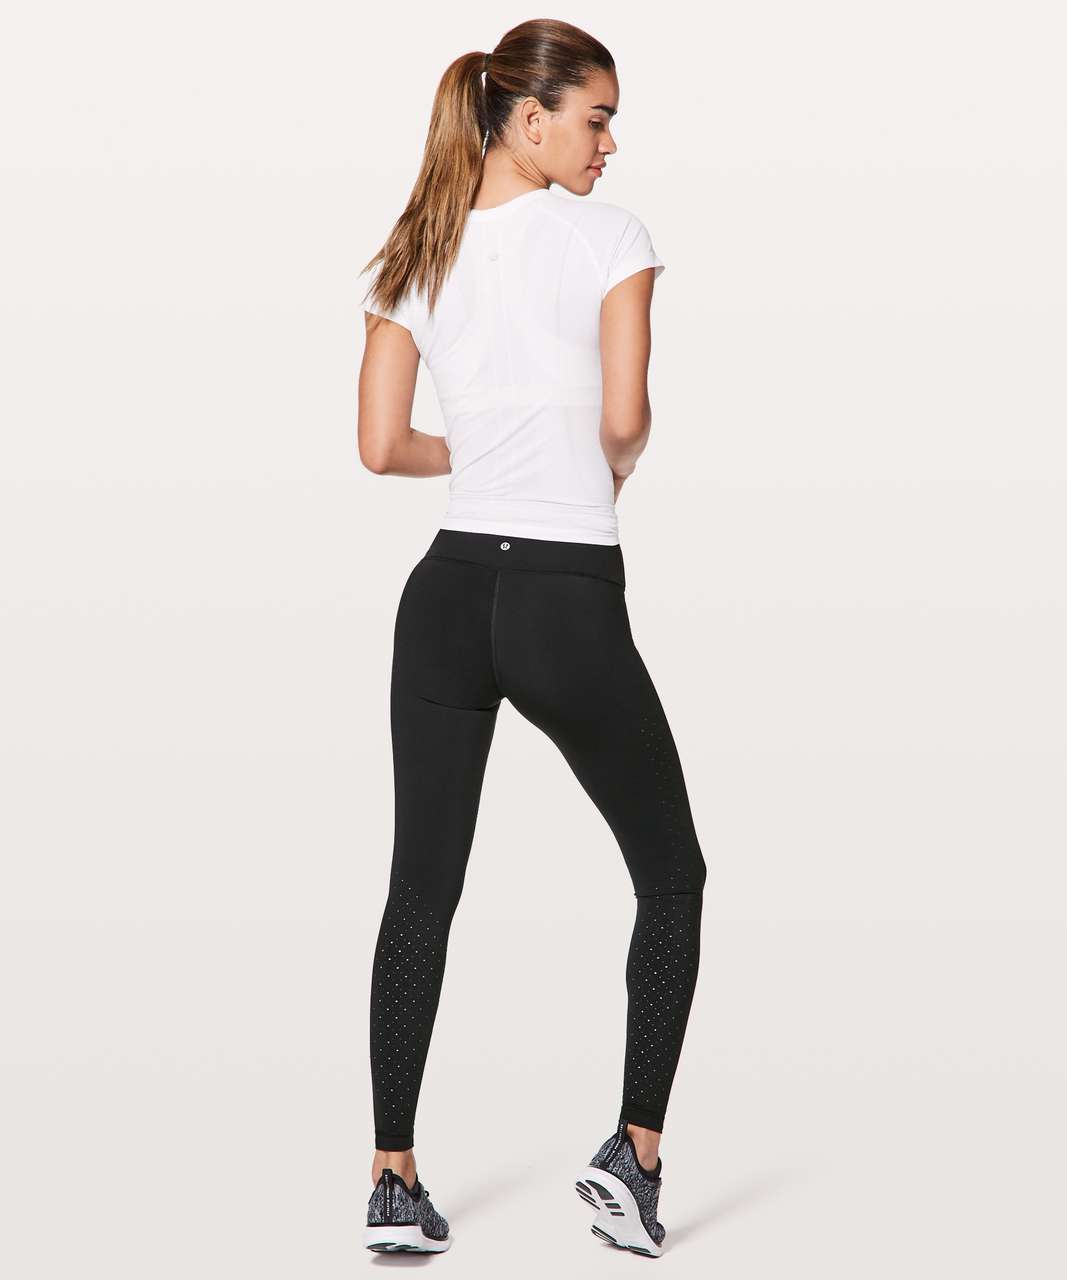 Lululemon Perf-ect Your Pace Tight *28 - Black